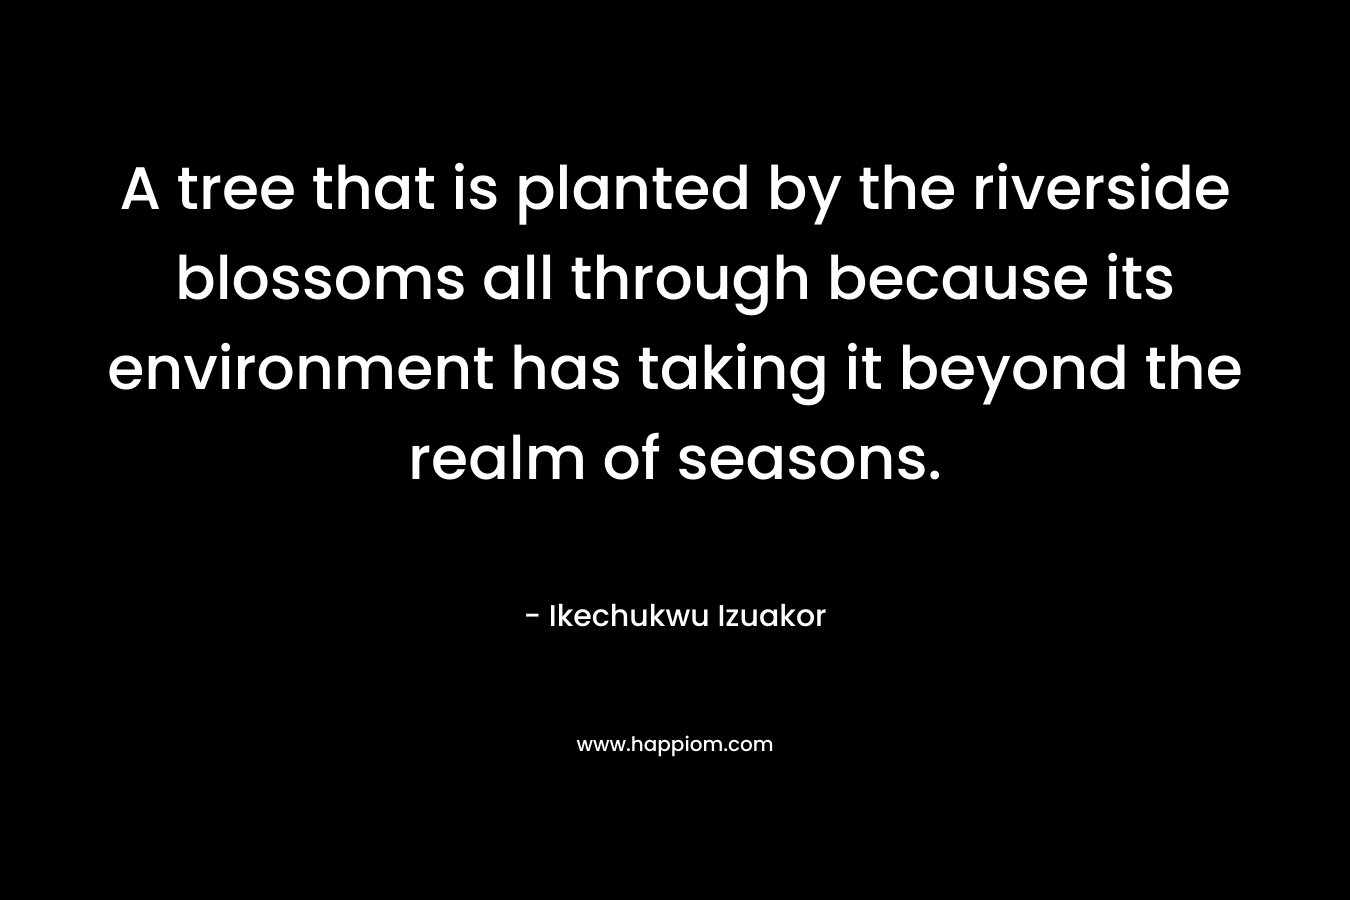 A tree that is planted by the riverside blossoms all through because its environment has taking it beyond the realm of seasons.